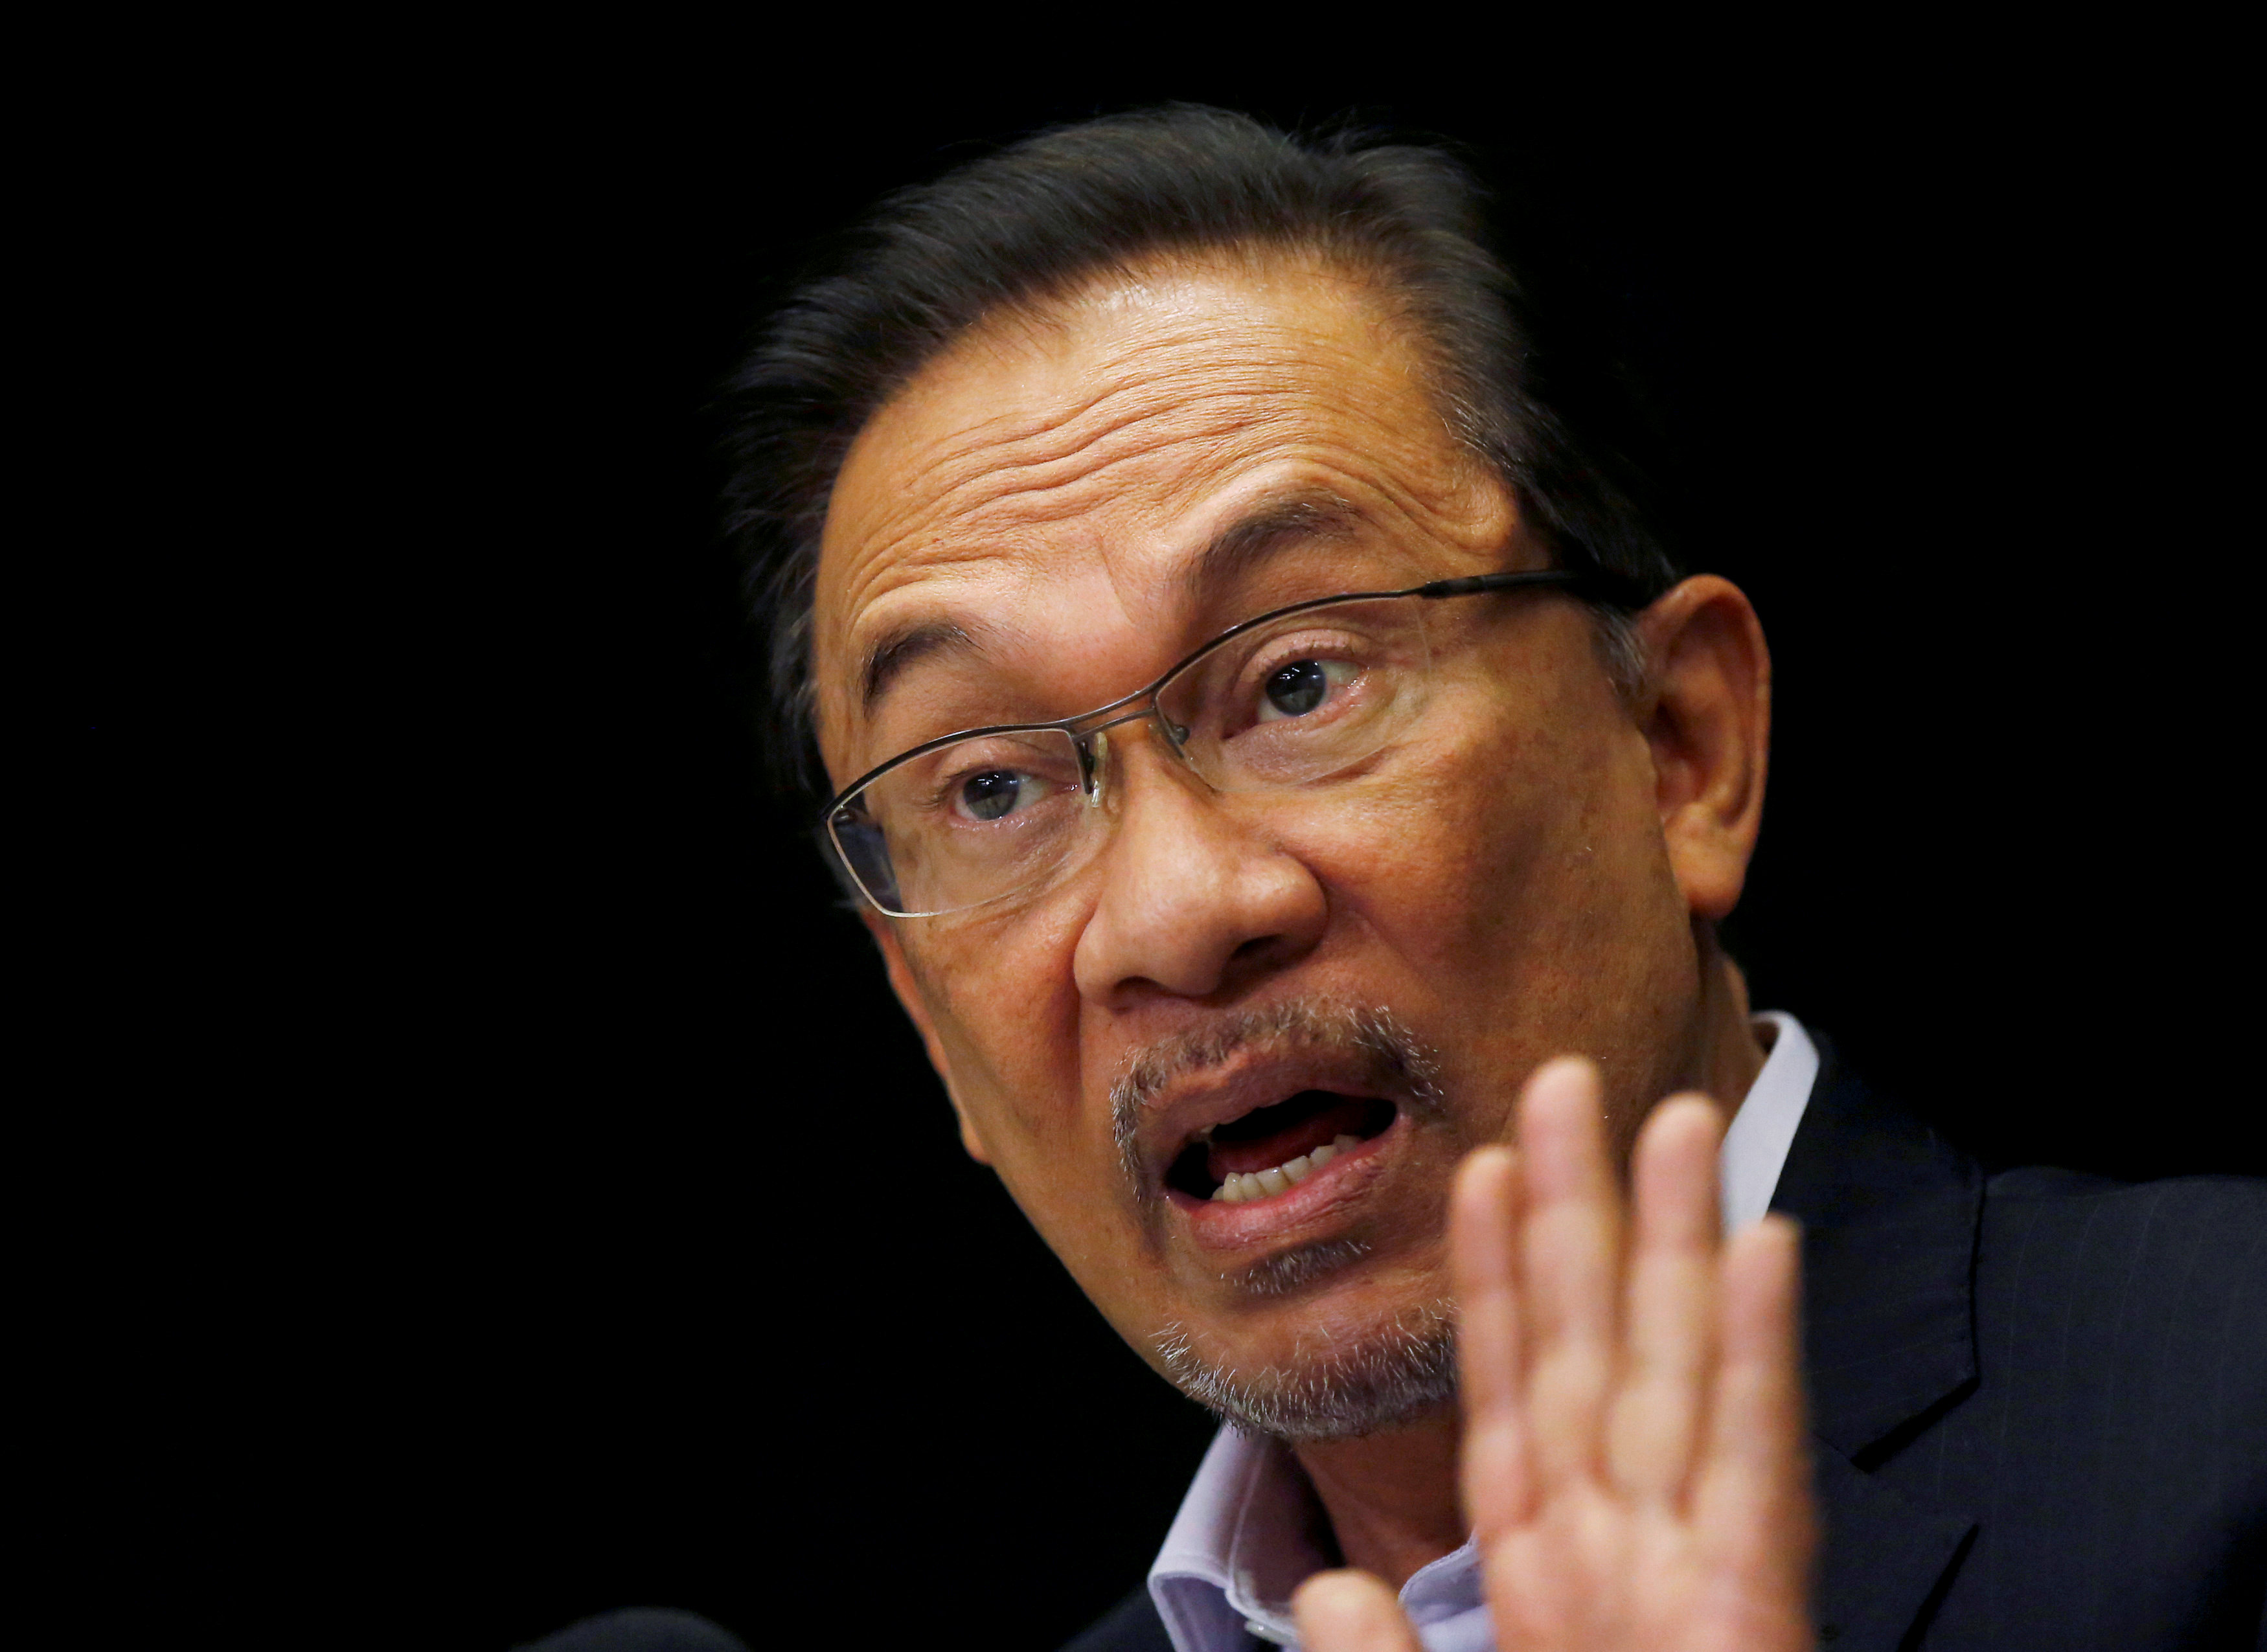 Malaysia's pardons board to discuss Anwar's release on Wednesday